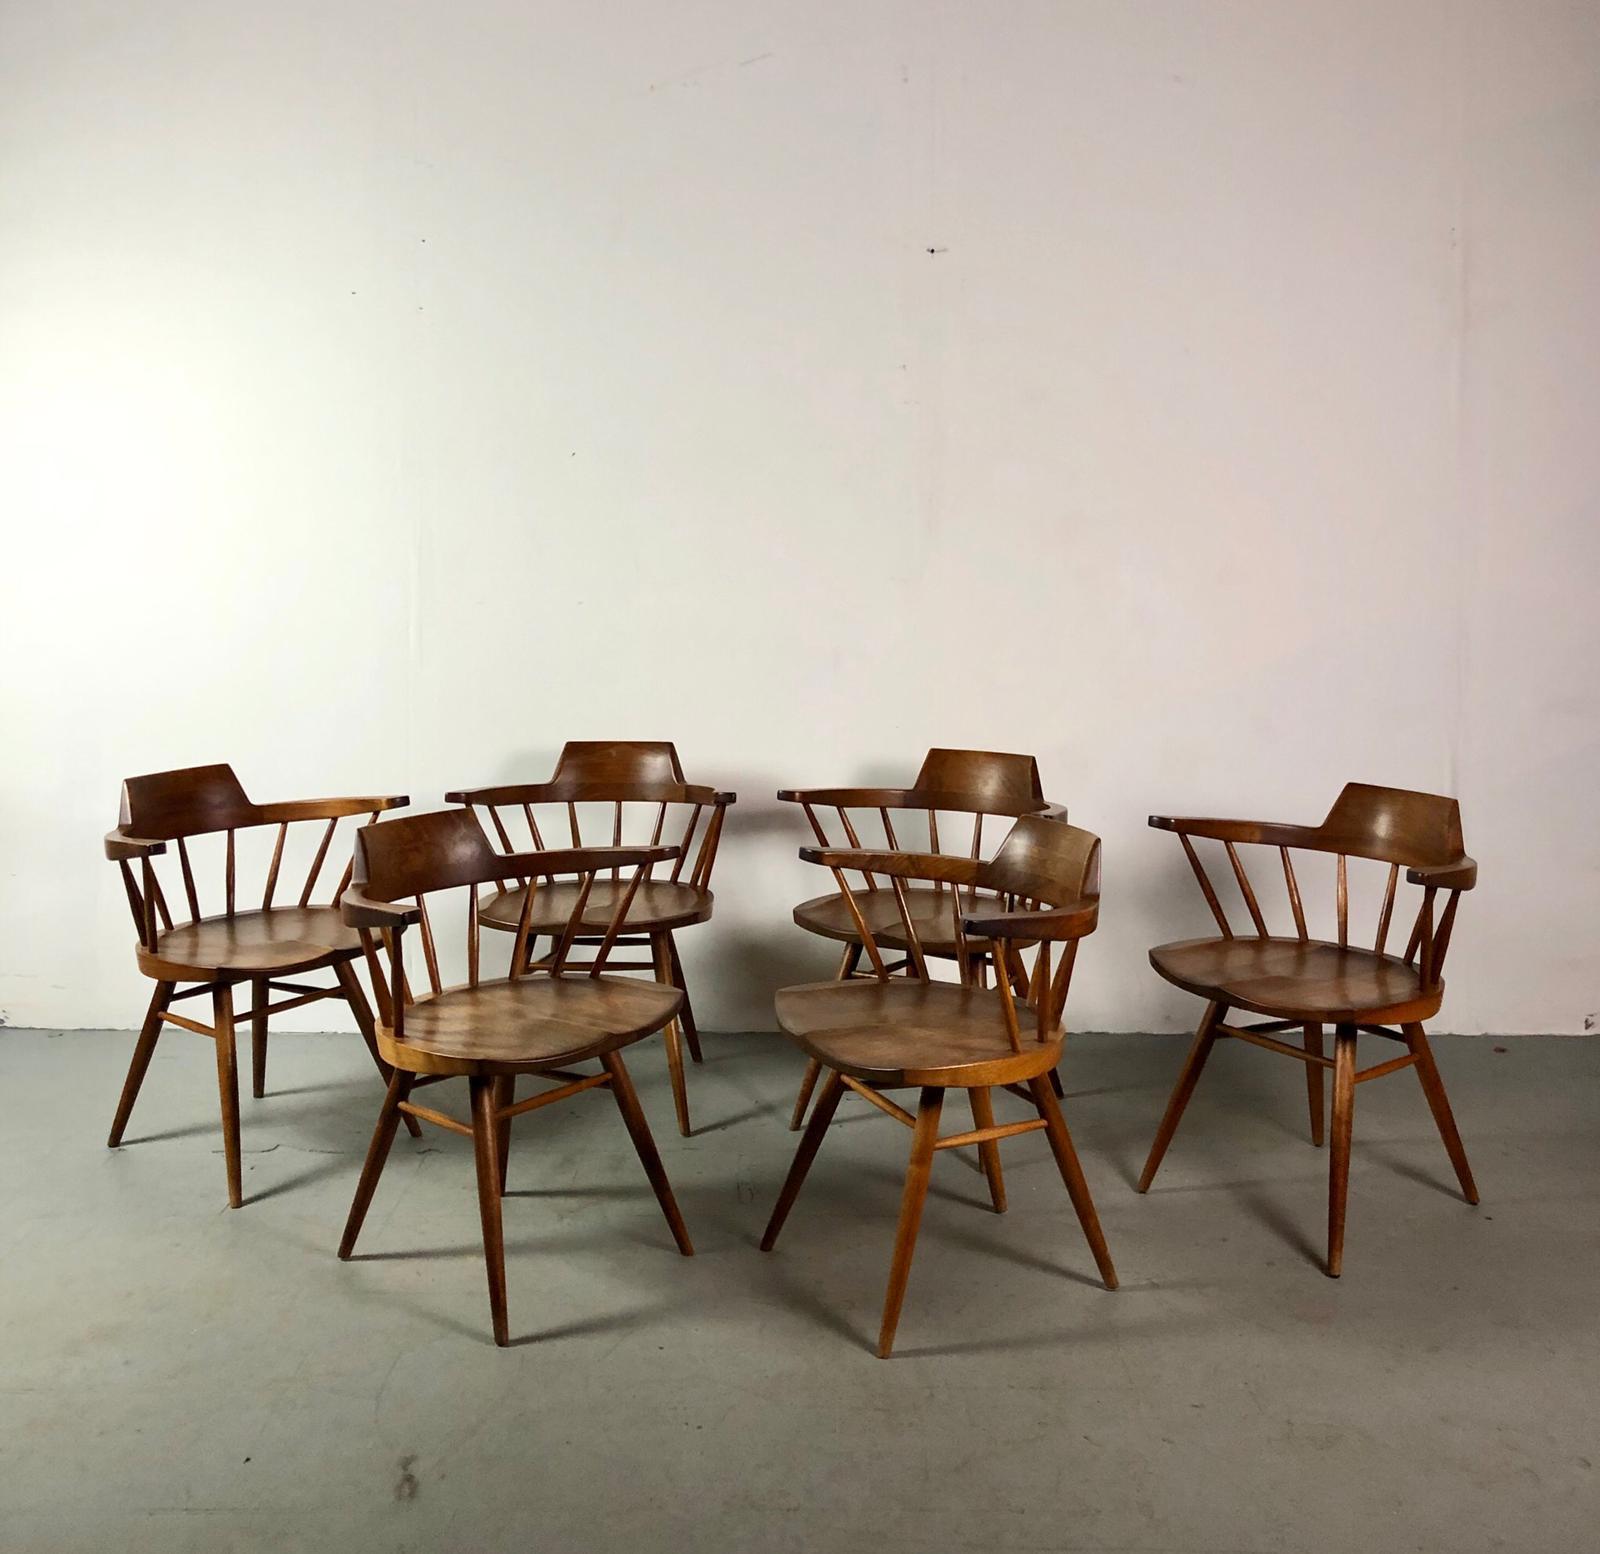 This set includes six early captain chairs and a one of a kind George Nakashima Plank dining table with two leaves. We have full documentation with drawings, conversations and invoice of George Nakashima.
We were able to source this rare set from